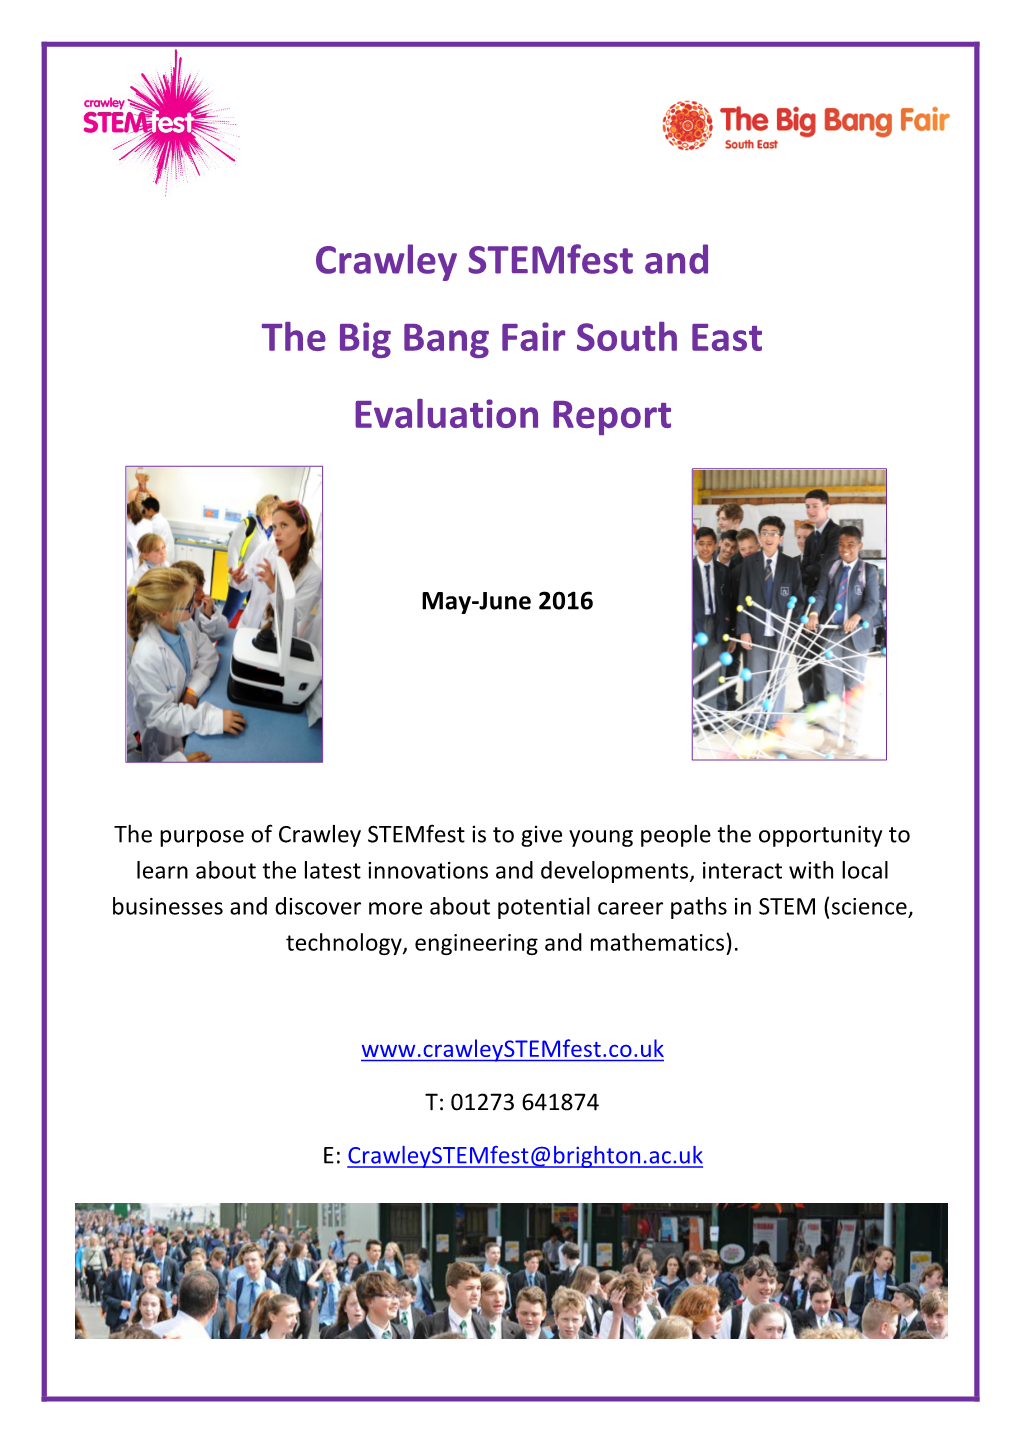 Crawley Stemfest and the Big Bang Fair South East Evaluation Report